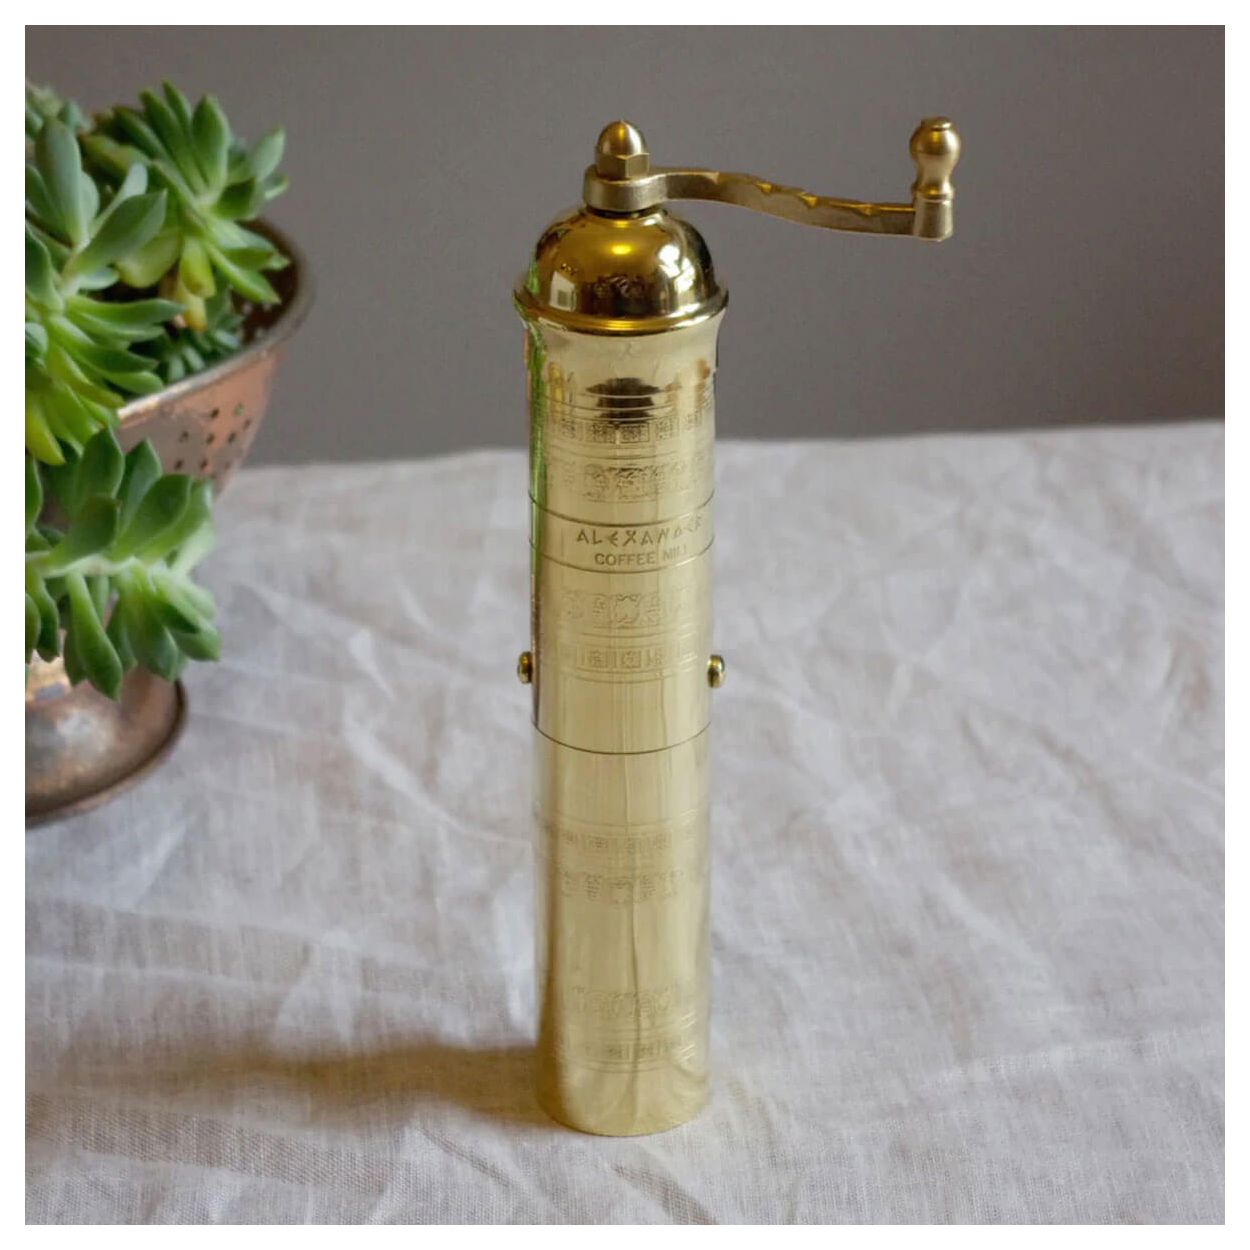 EZ-Assemble Vintage Style Salt and Pepper Mill Mechanism in Antique Brass